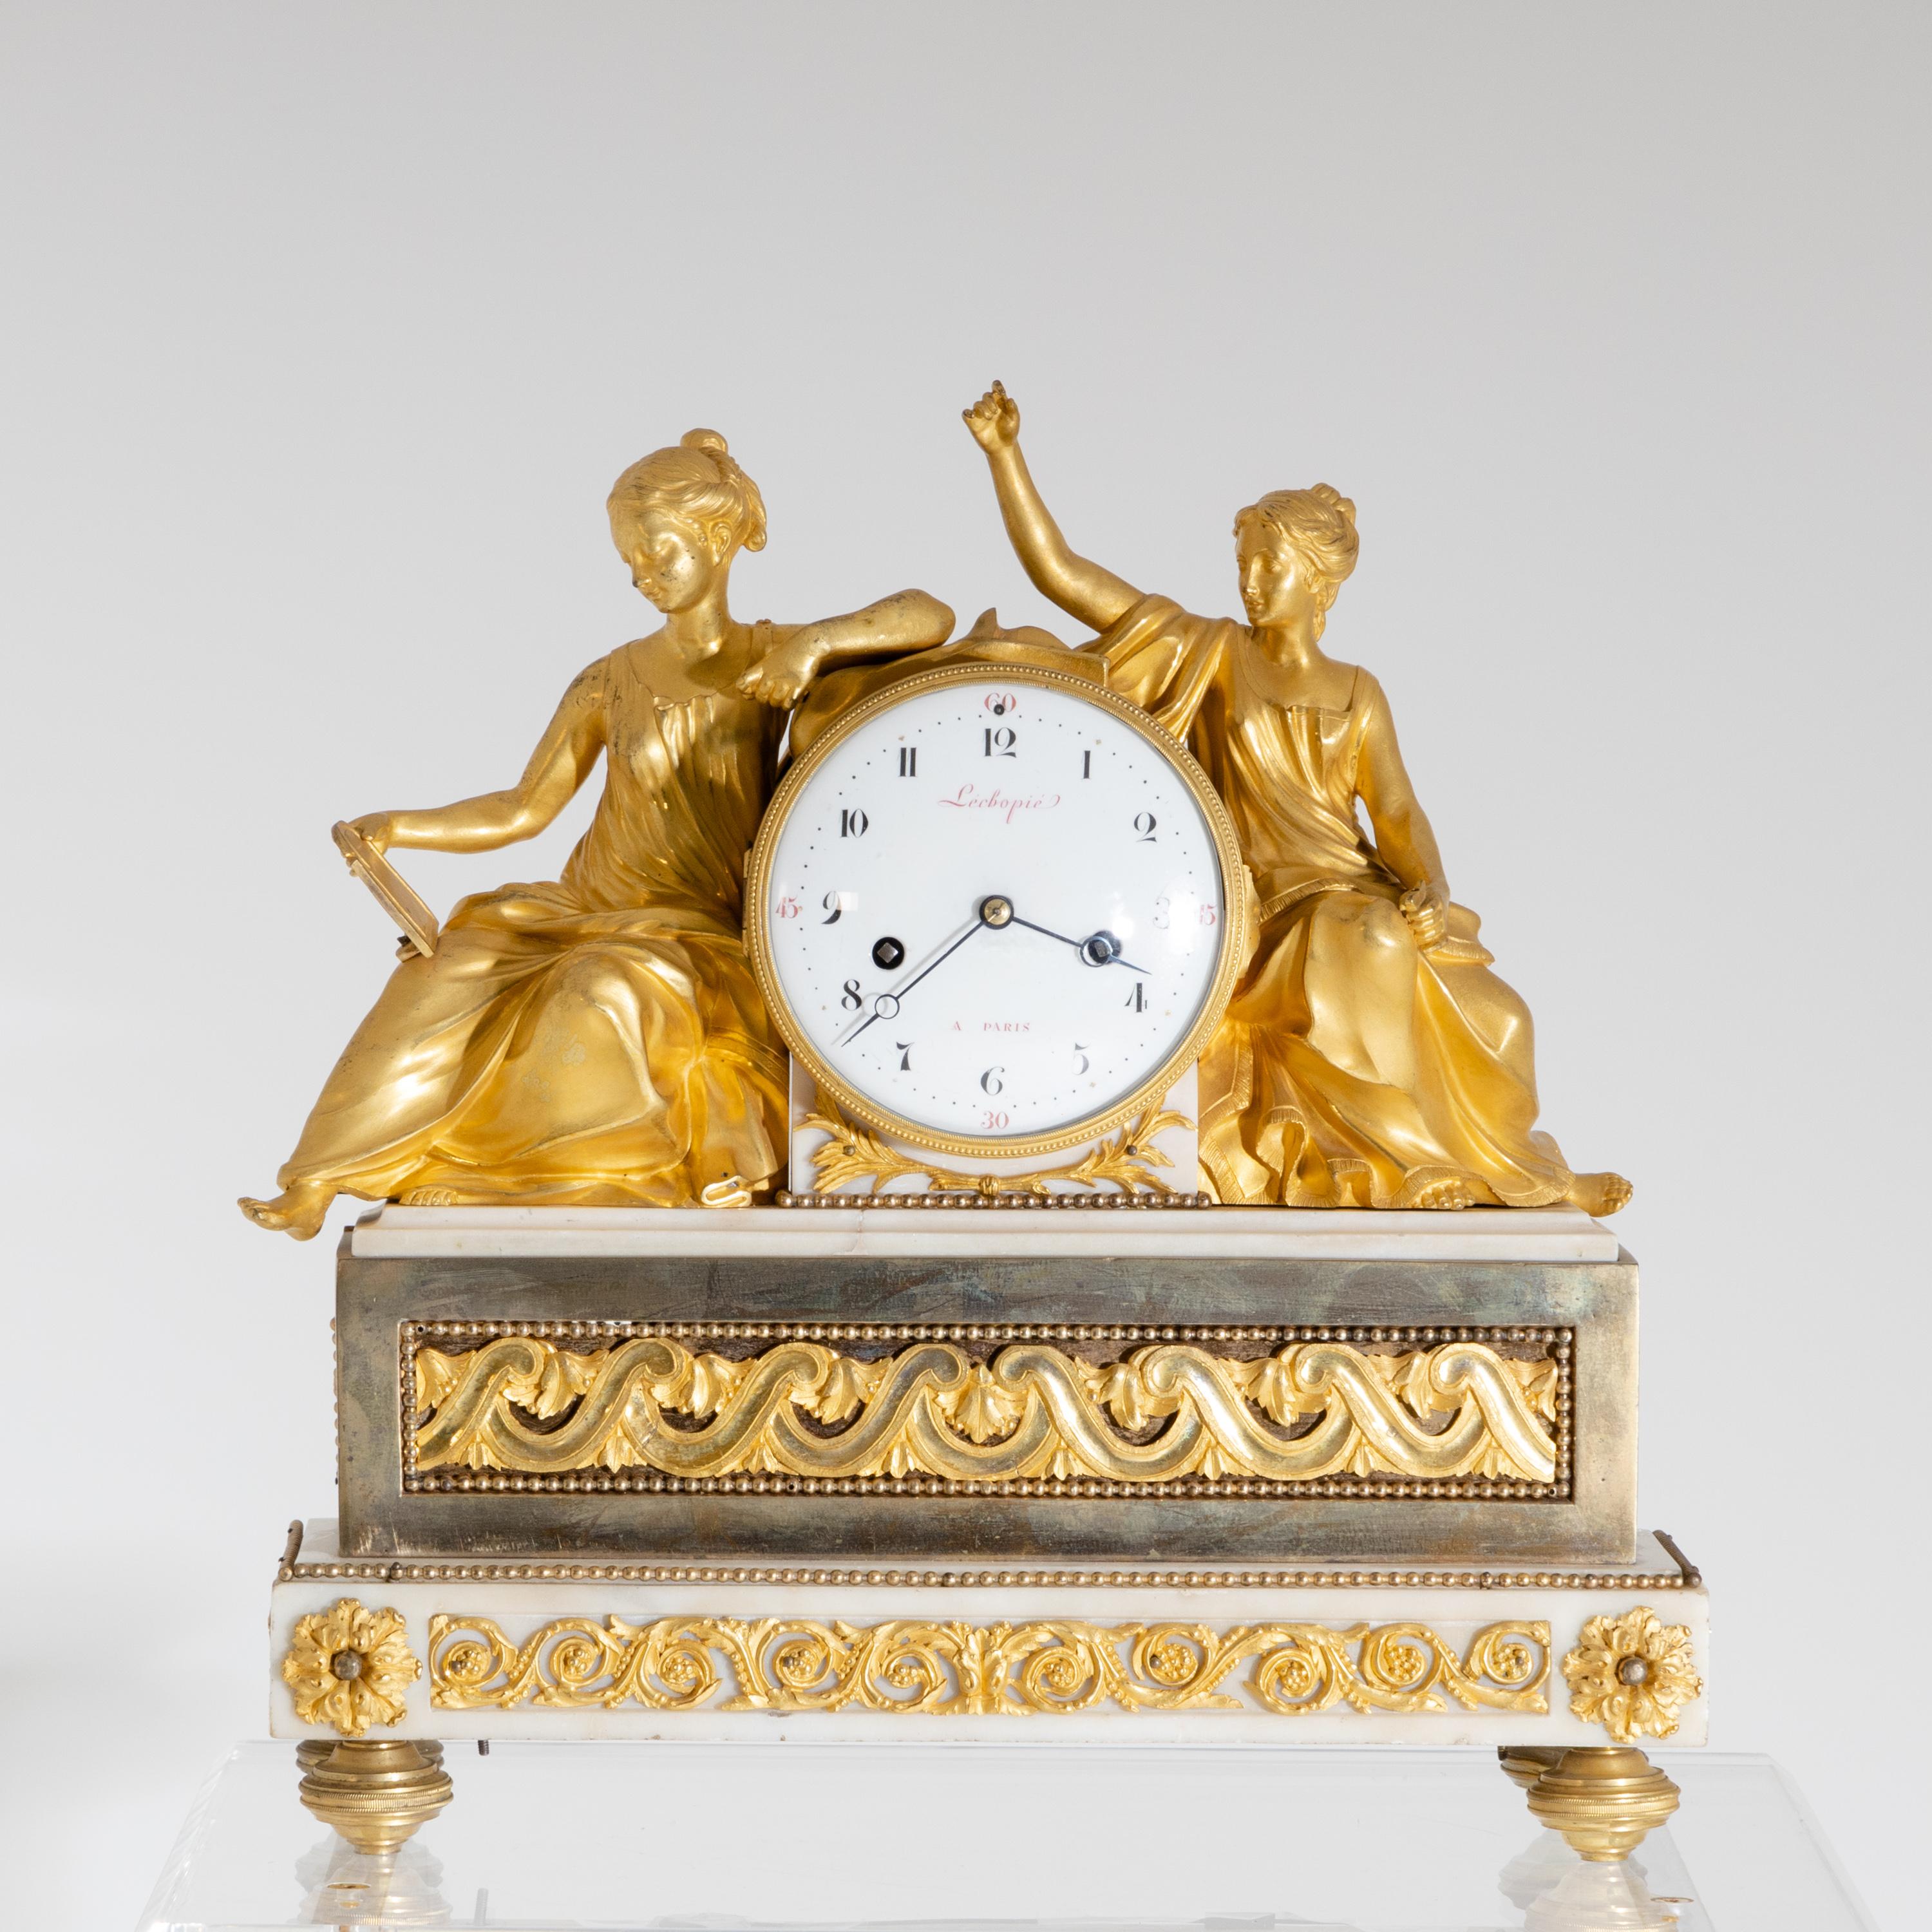 Pendule Clock “Studying the Tablets of the Law”, France, Paris, circa 1770-1780 5